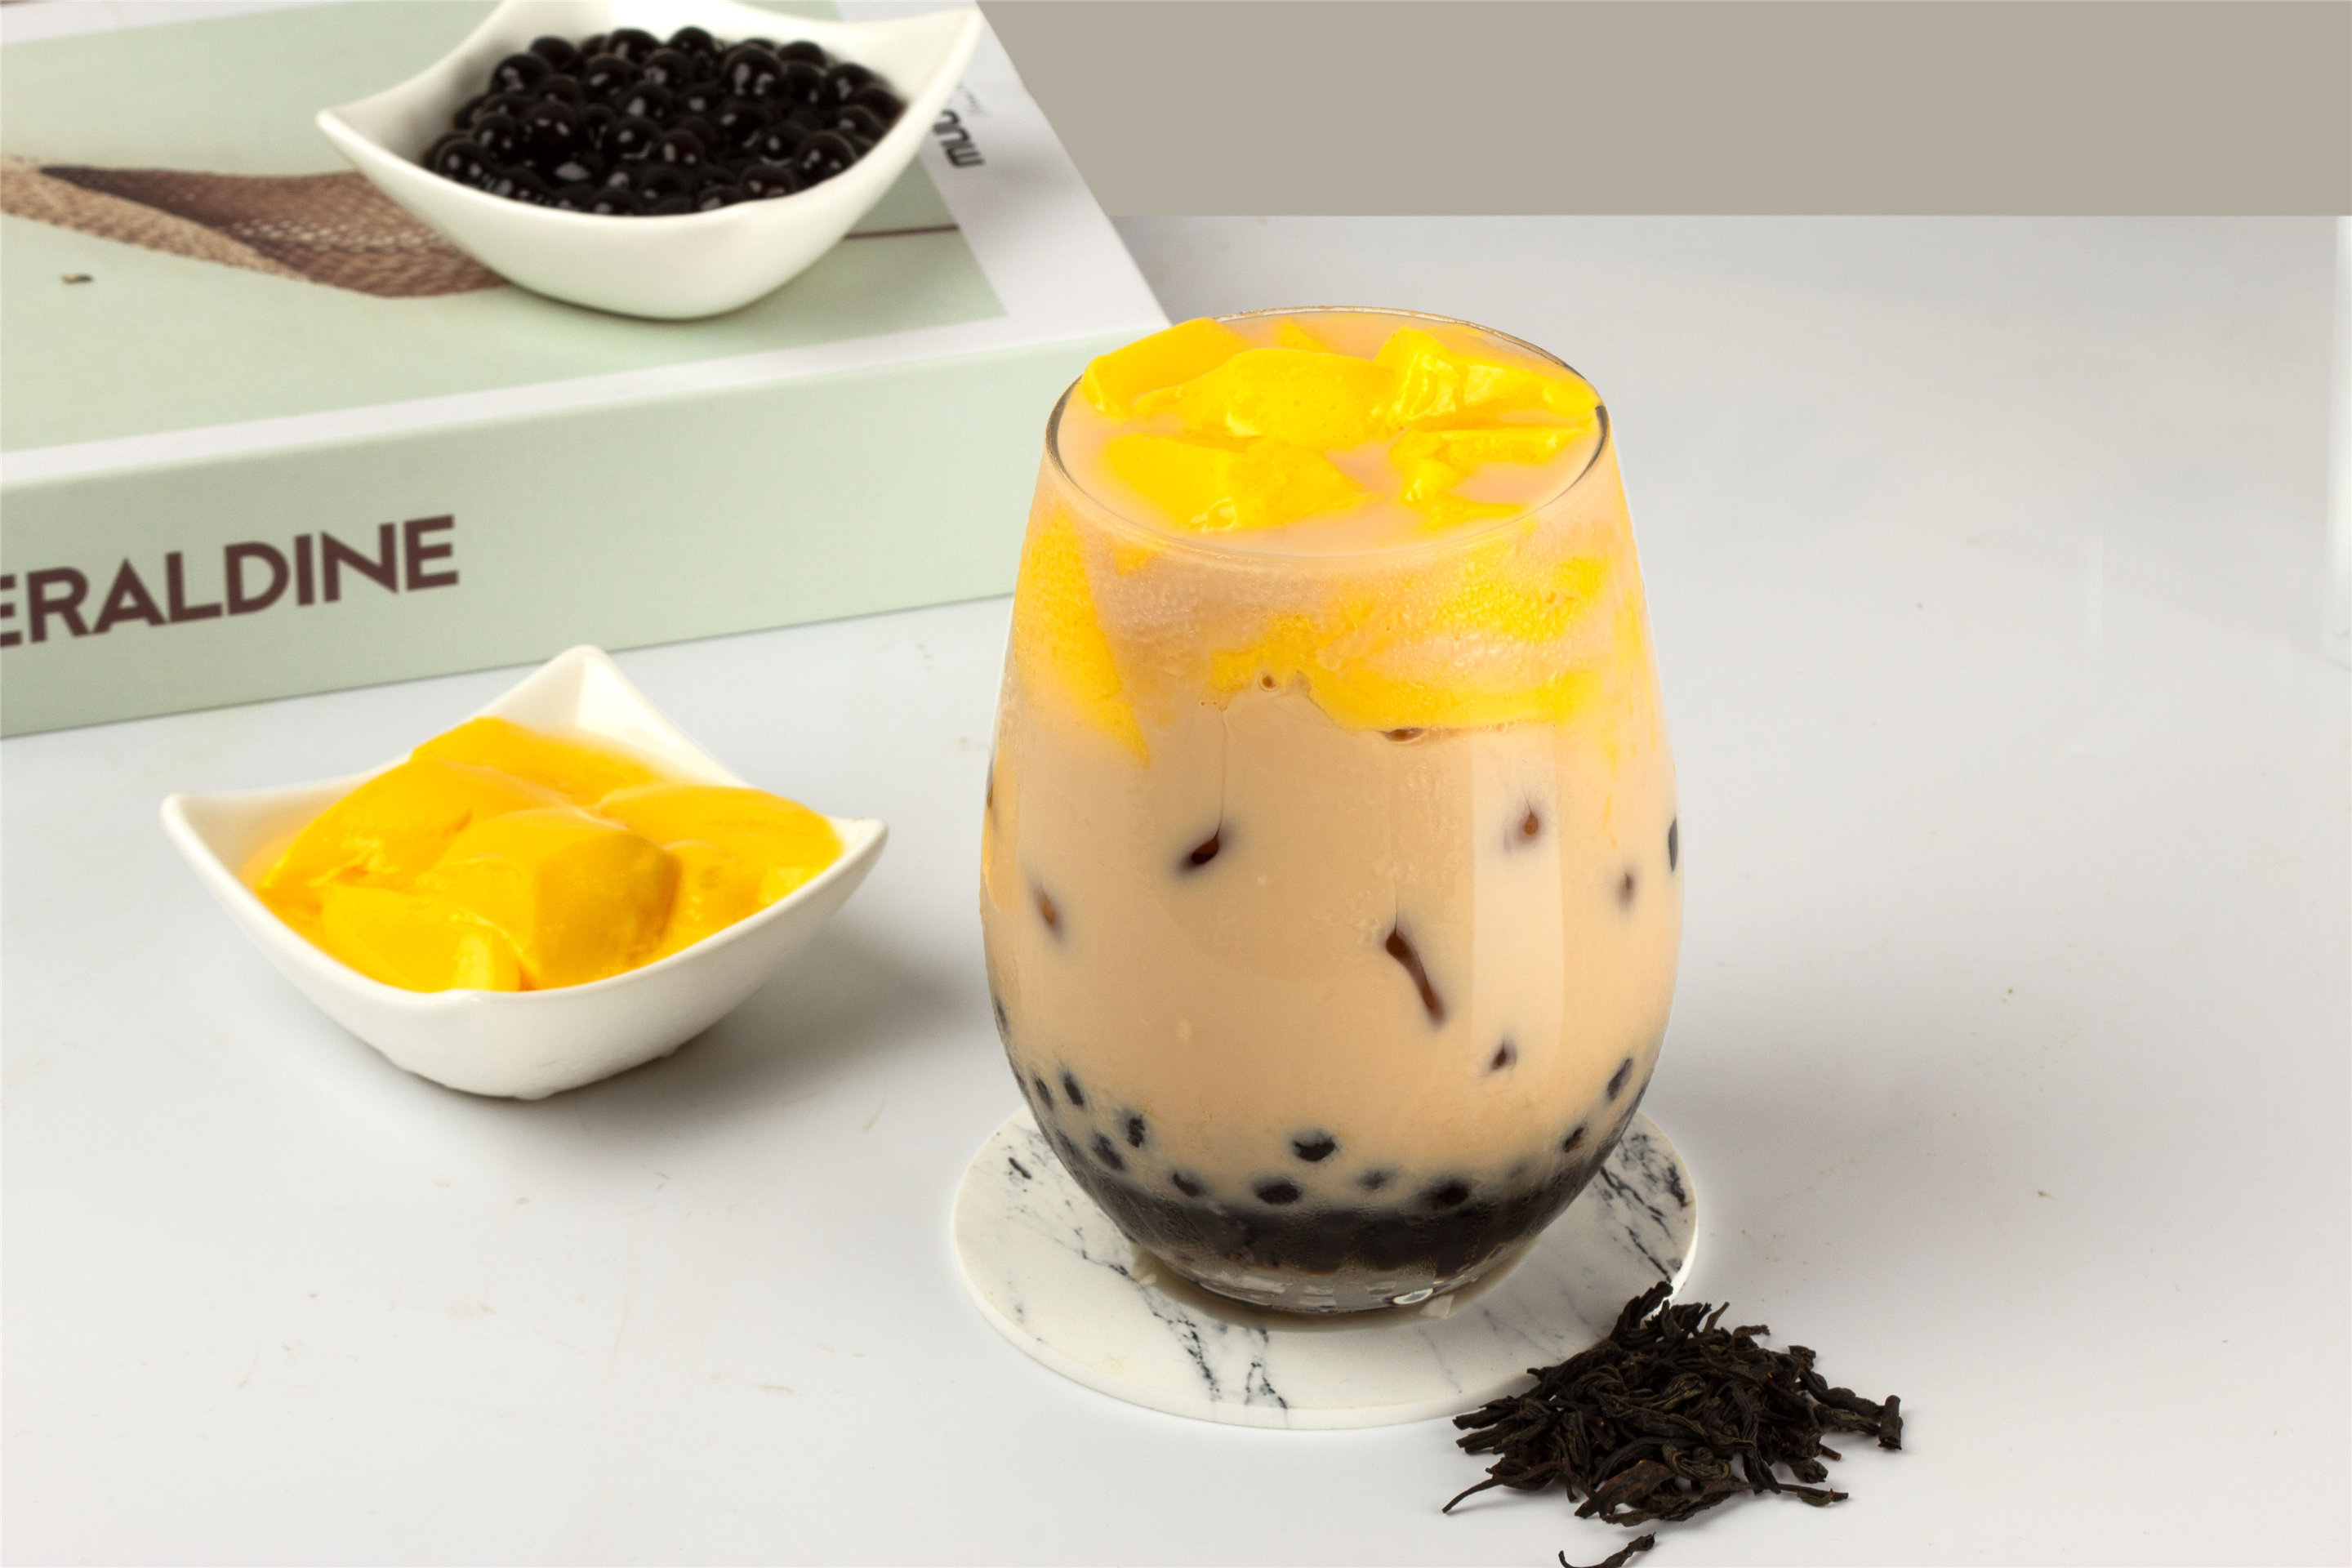 What is in boba tea kit?